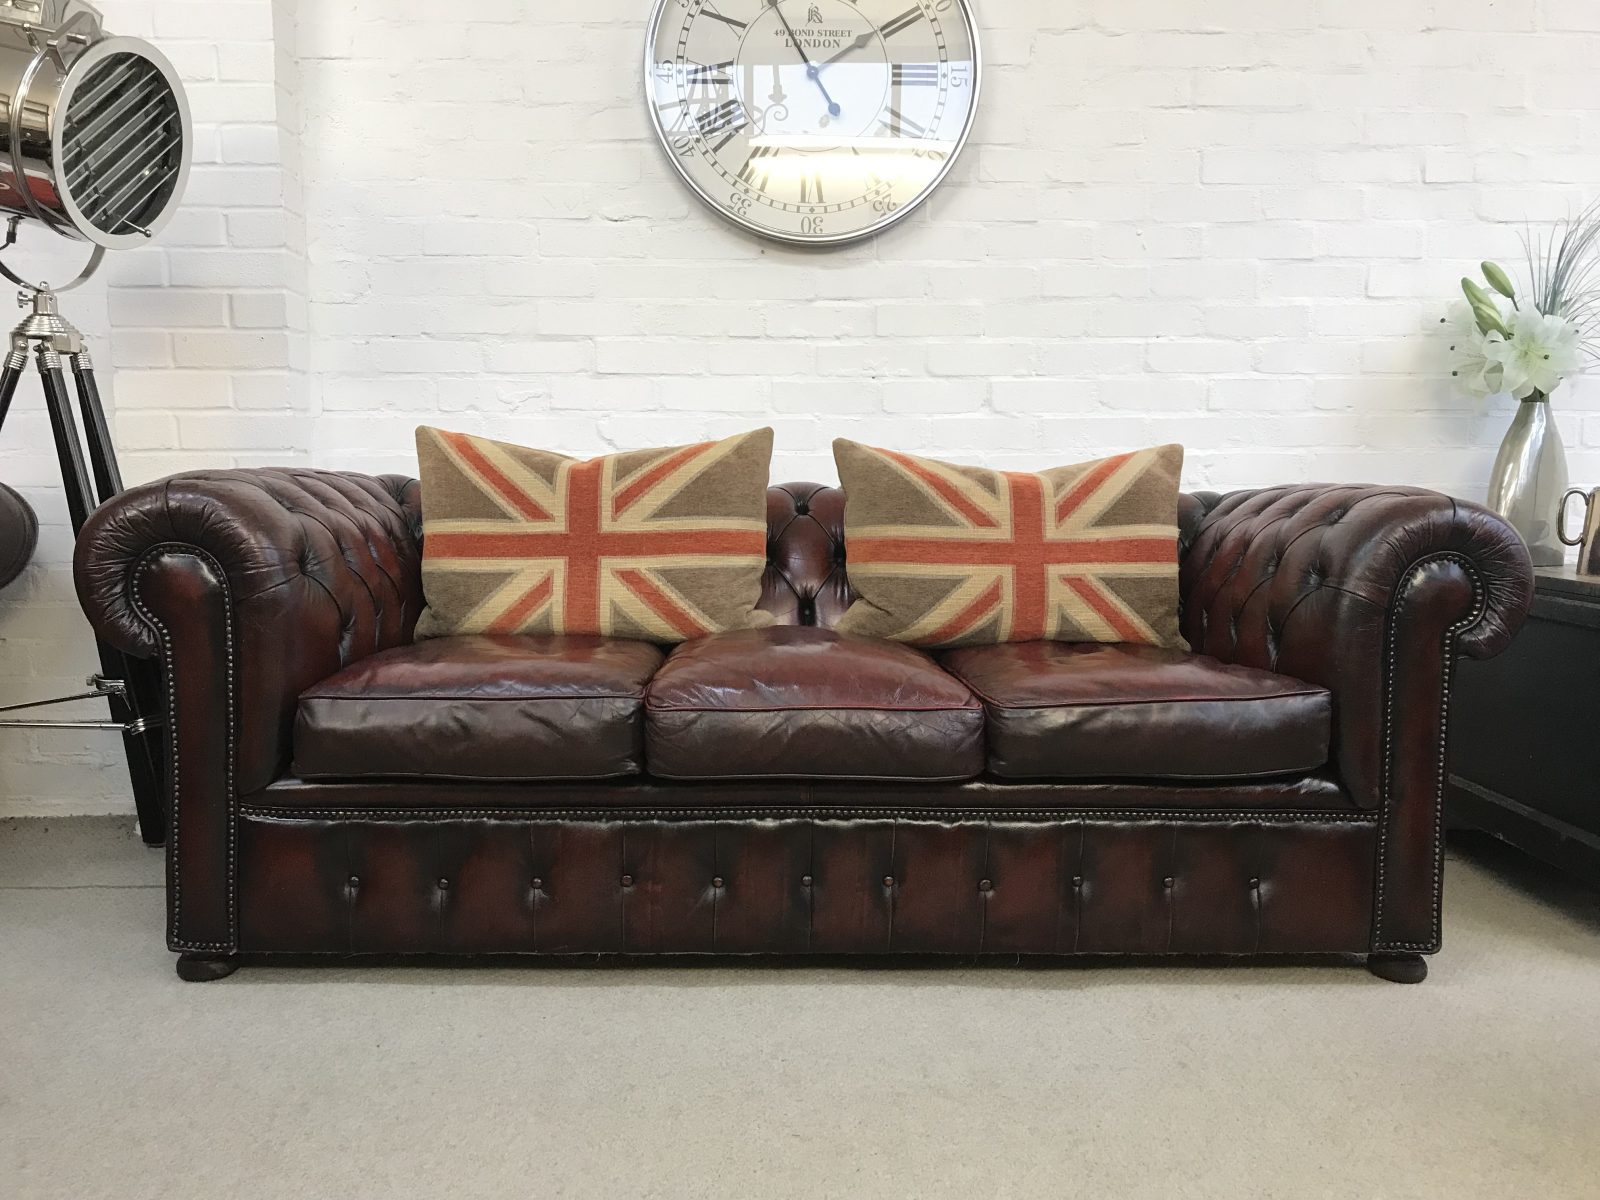 Super Vintage Oxblood Chesterfield Sofa. SOLD…… SOLD….